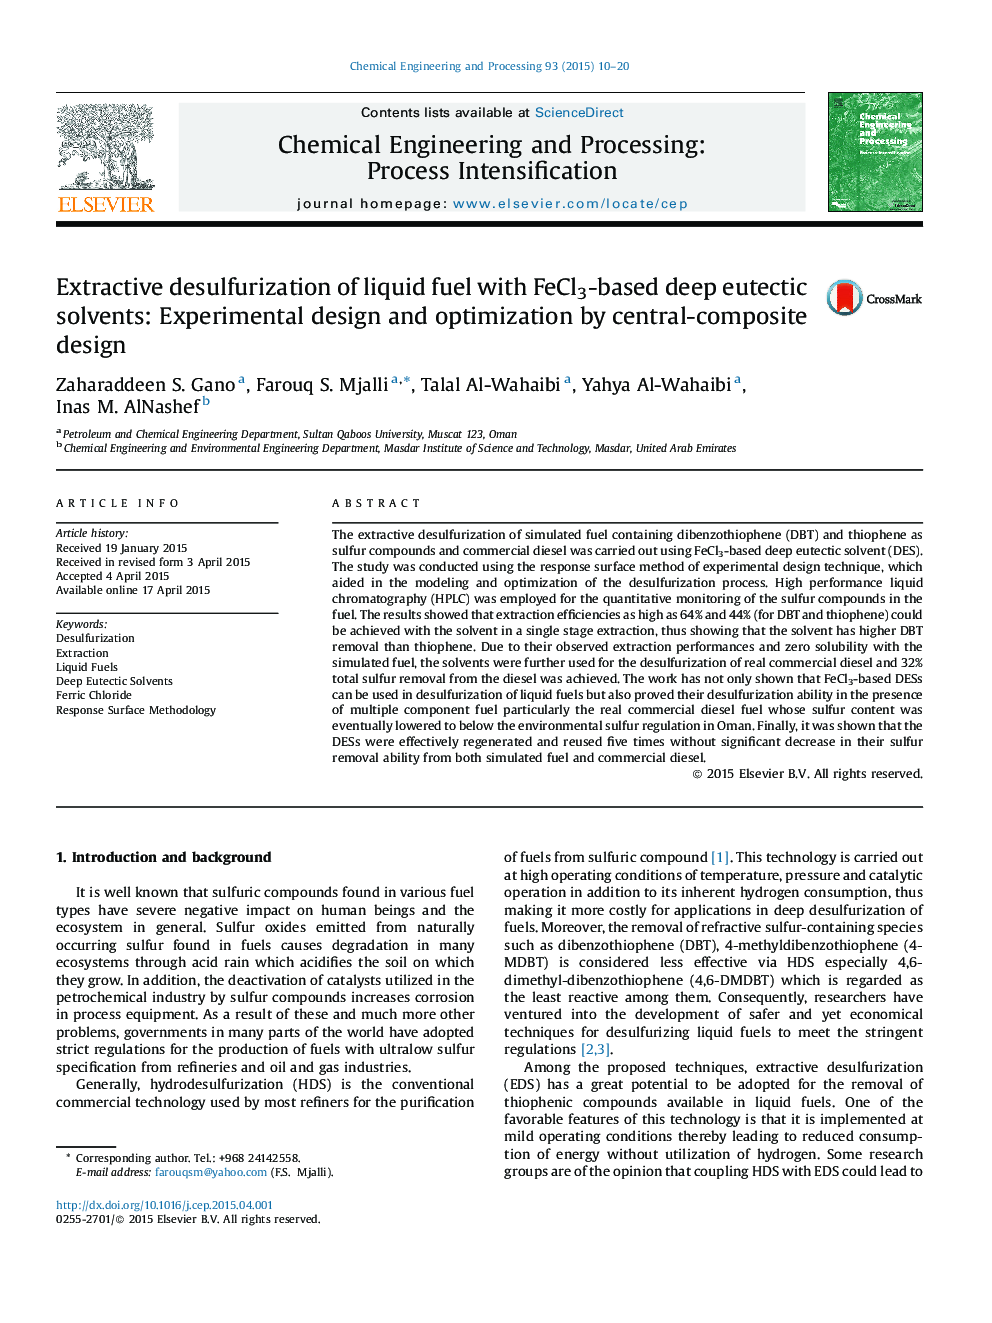 Extractive desulfurization of liquid fuel with FeCl3-based deep eutectic solvents: Experimental design and optimization by central-composite design